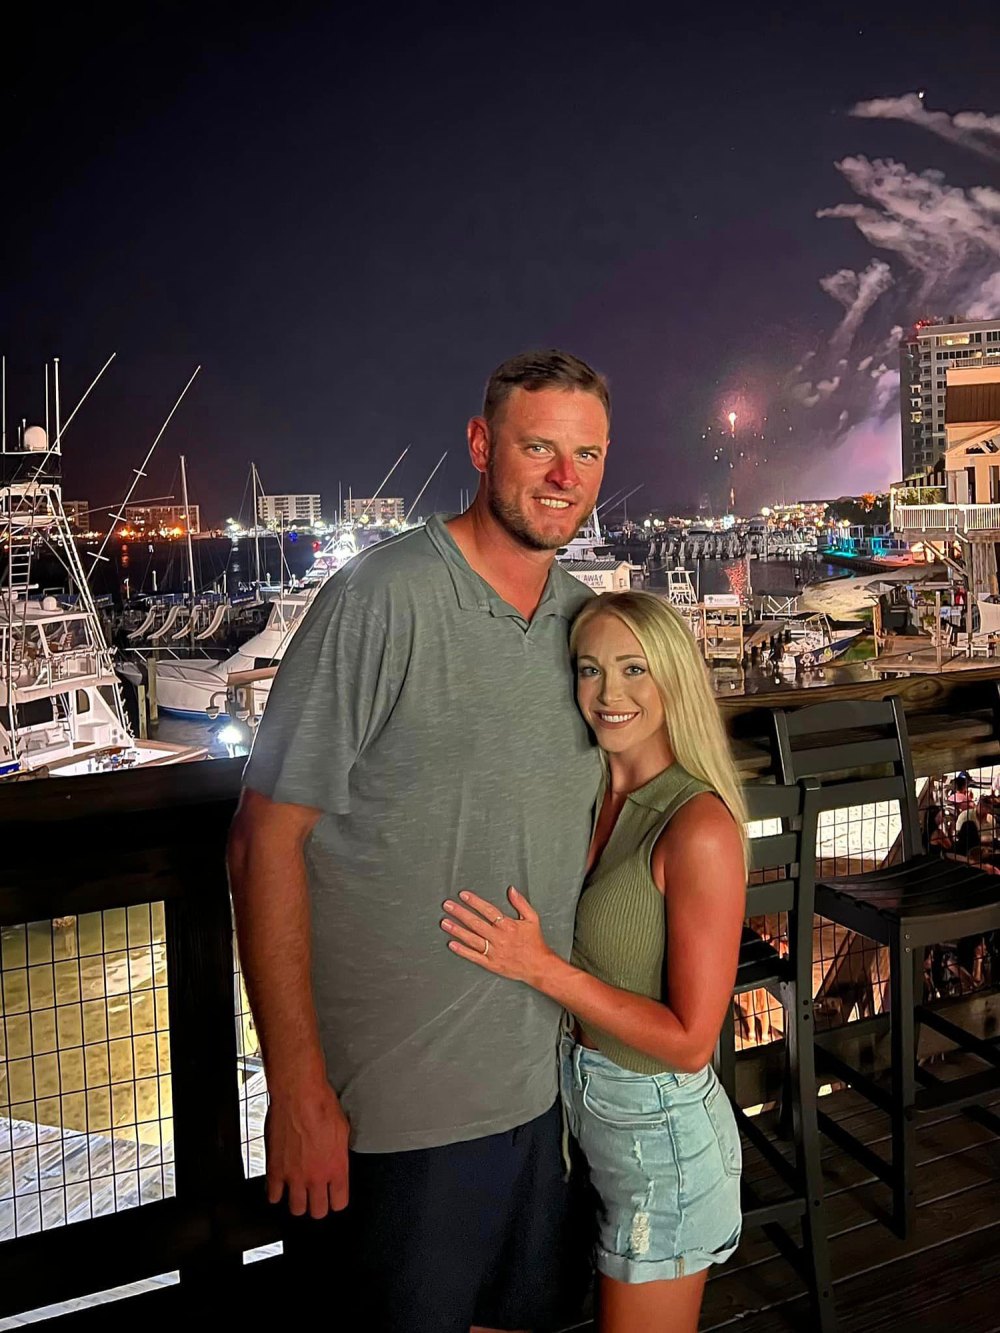 Ryan Mallett Girlfriend Madison Carter Shares Tribute to Late Athlete After His Death